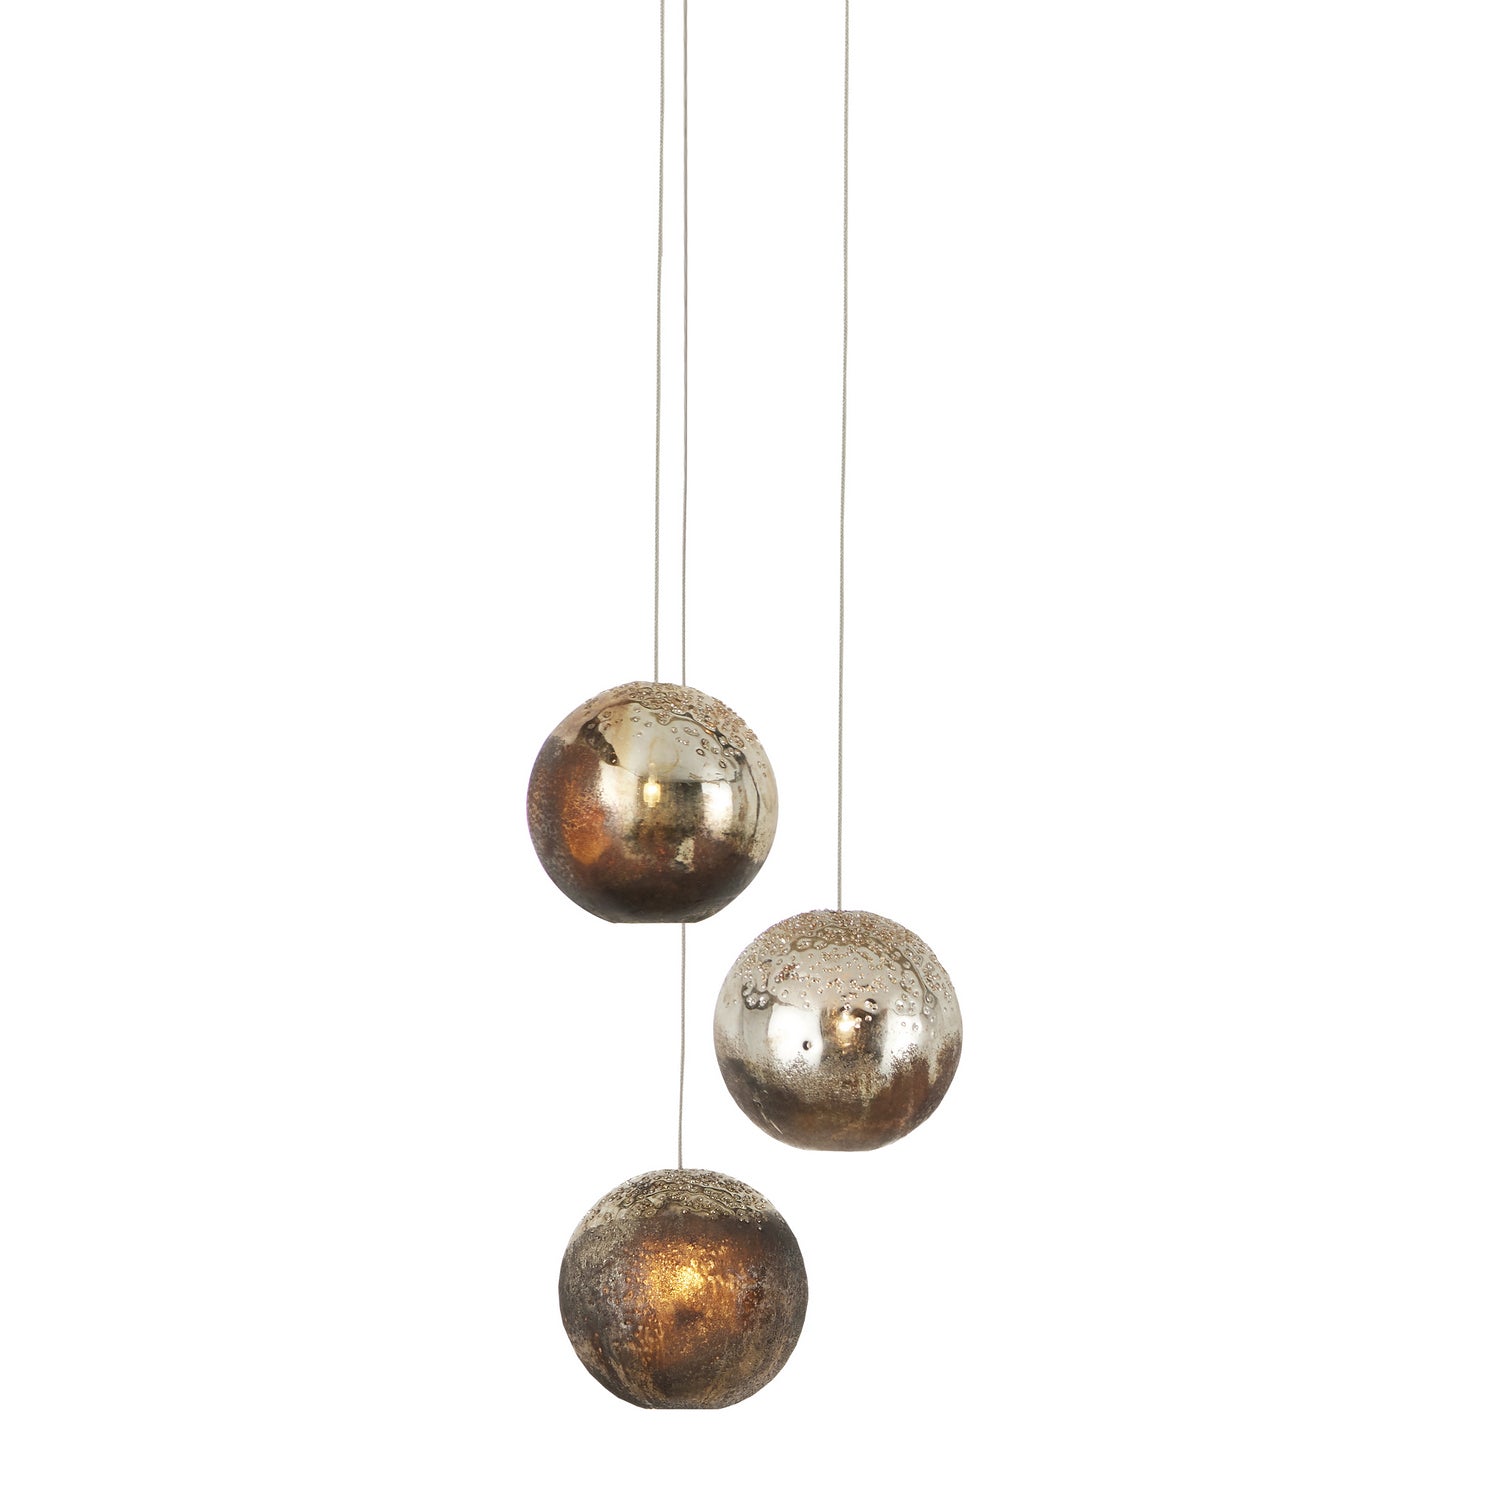 Currey and Company - 9000-1013 - Three Light Pendant - Pathos - Antique Silver/Antique Gold/Matte Charcoal/Silver